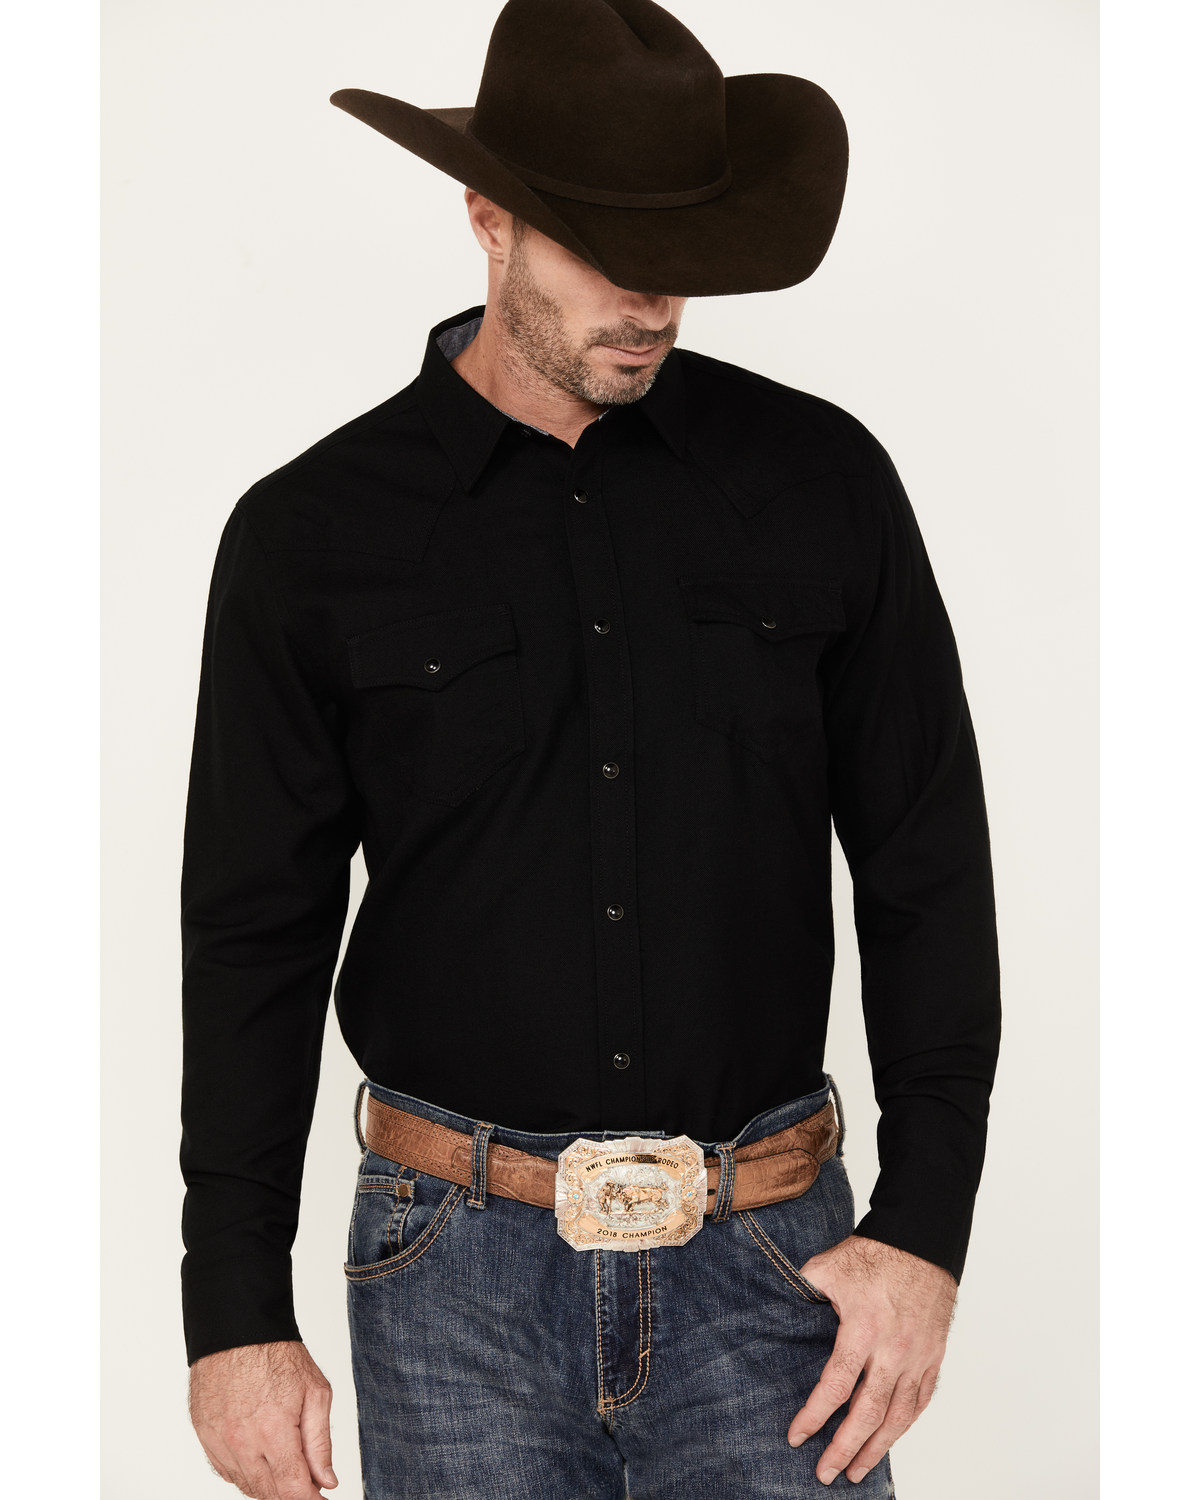 Cody James Men's Wooly Mammoth Solid Long Sleeve Snap Western Shirt